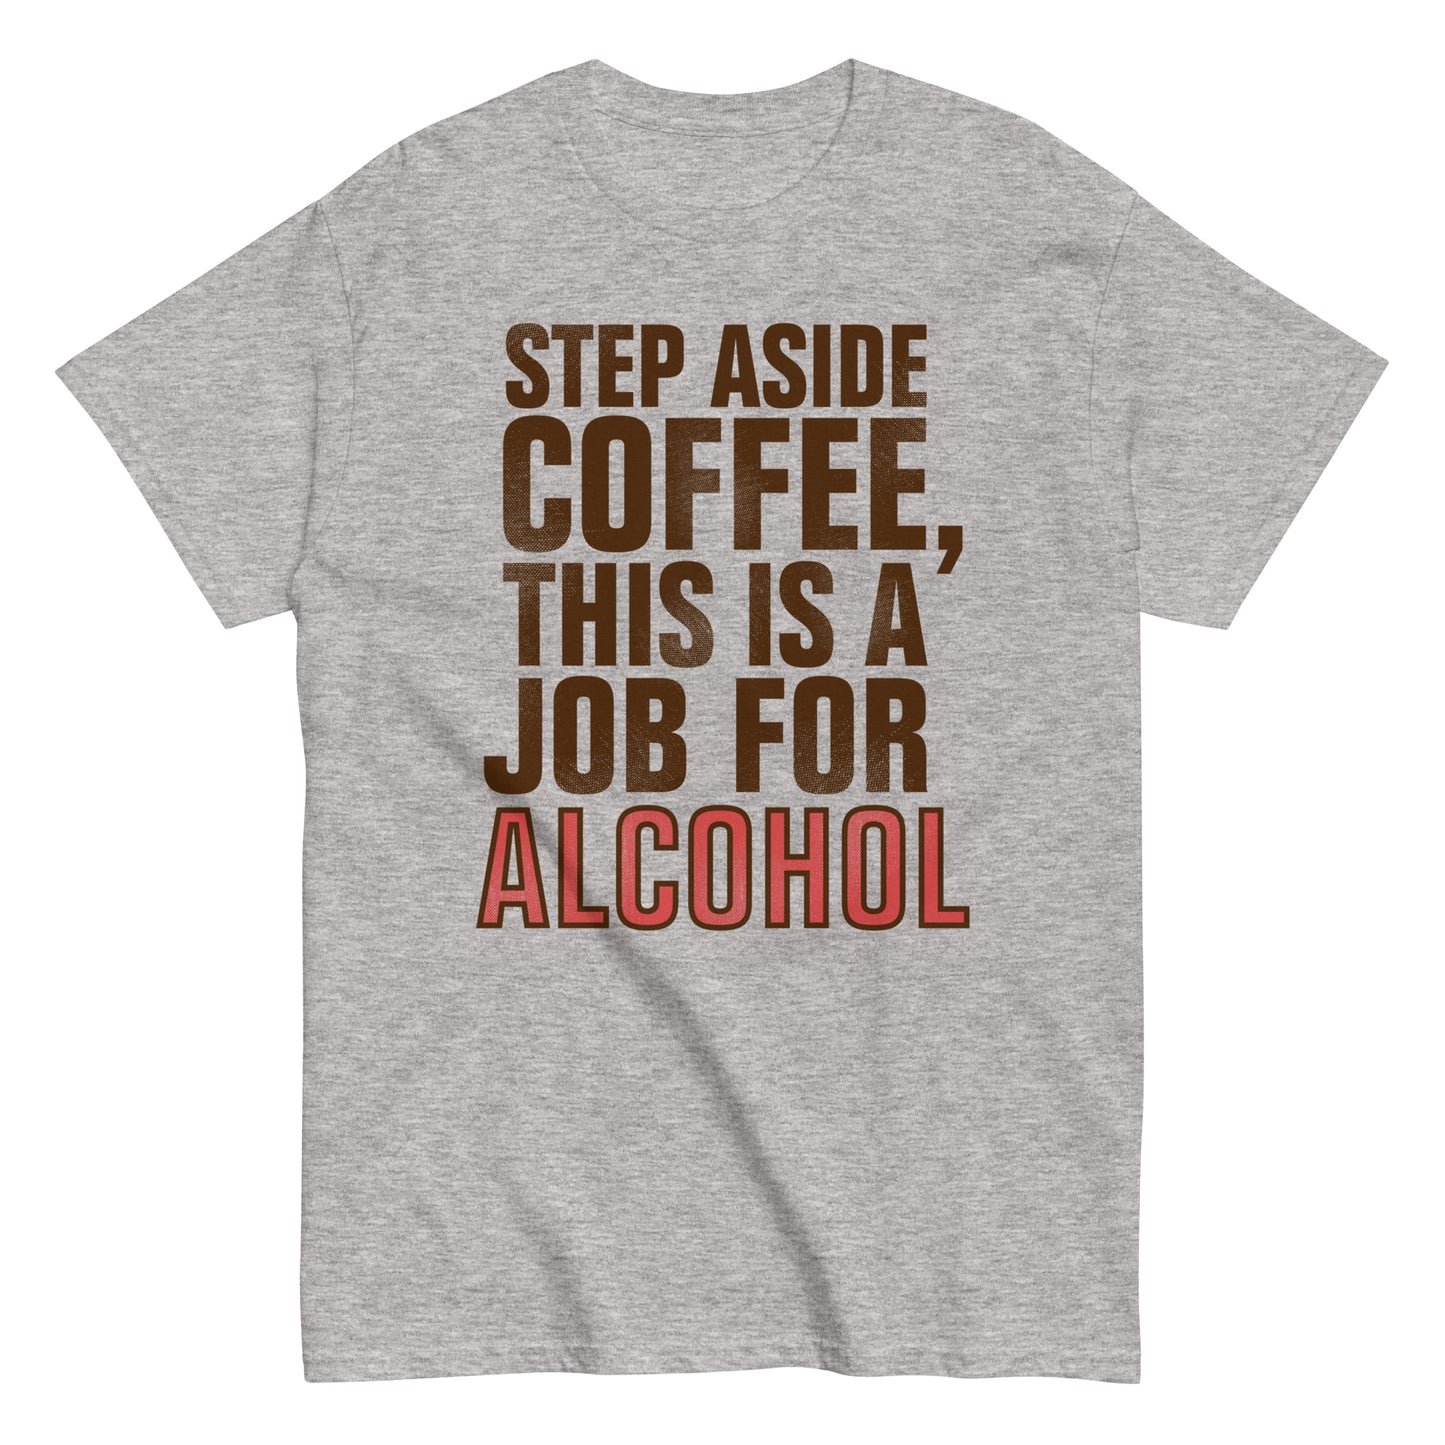 Step Aside Coffee, This Is A Job For Alcohol Men's Classic Tee